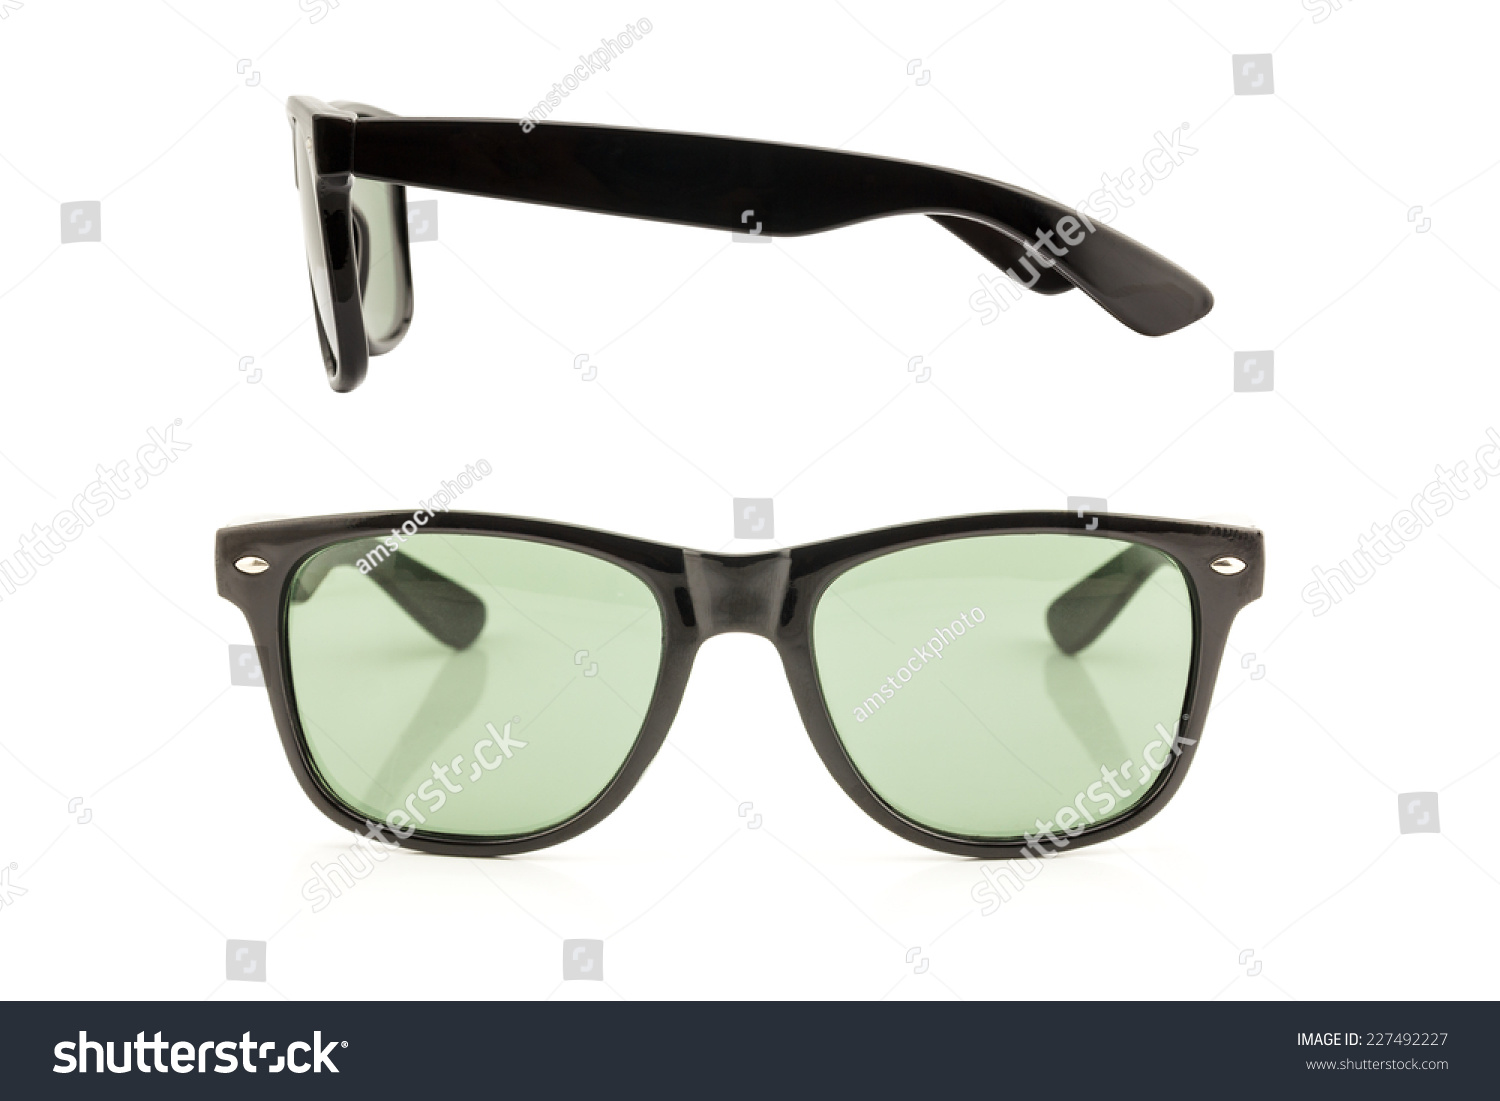 Front Side View Black Sunglasses On Stock Photo 227492227 - Shutterstock